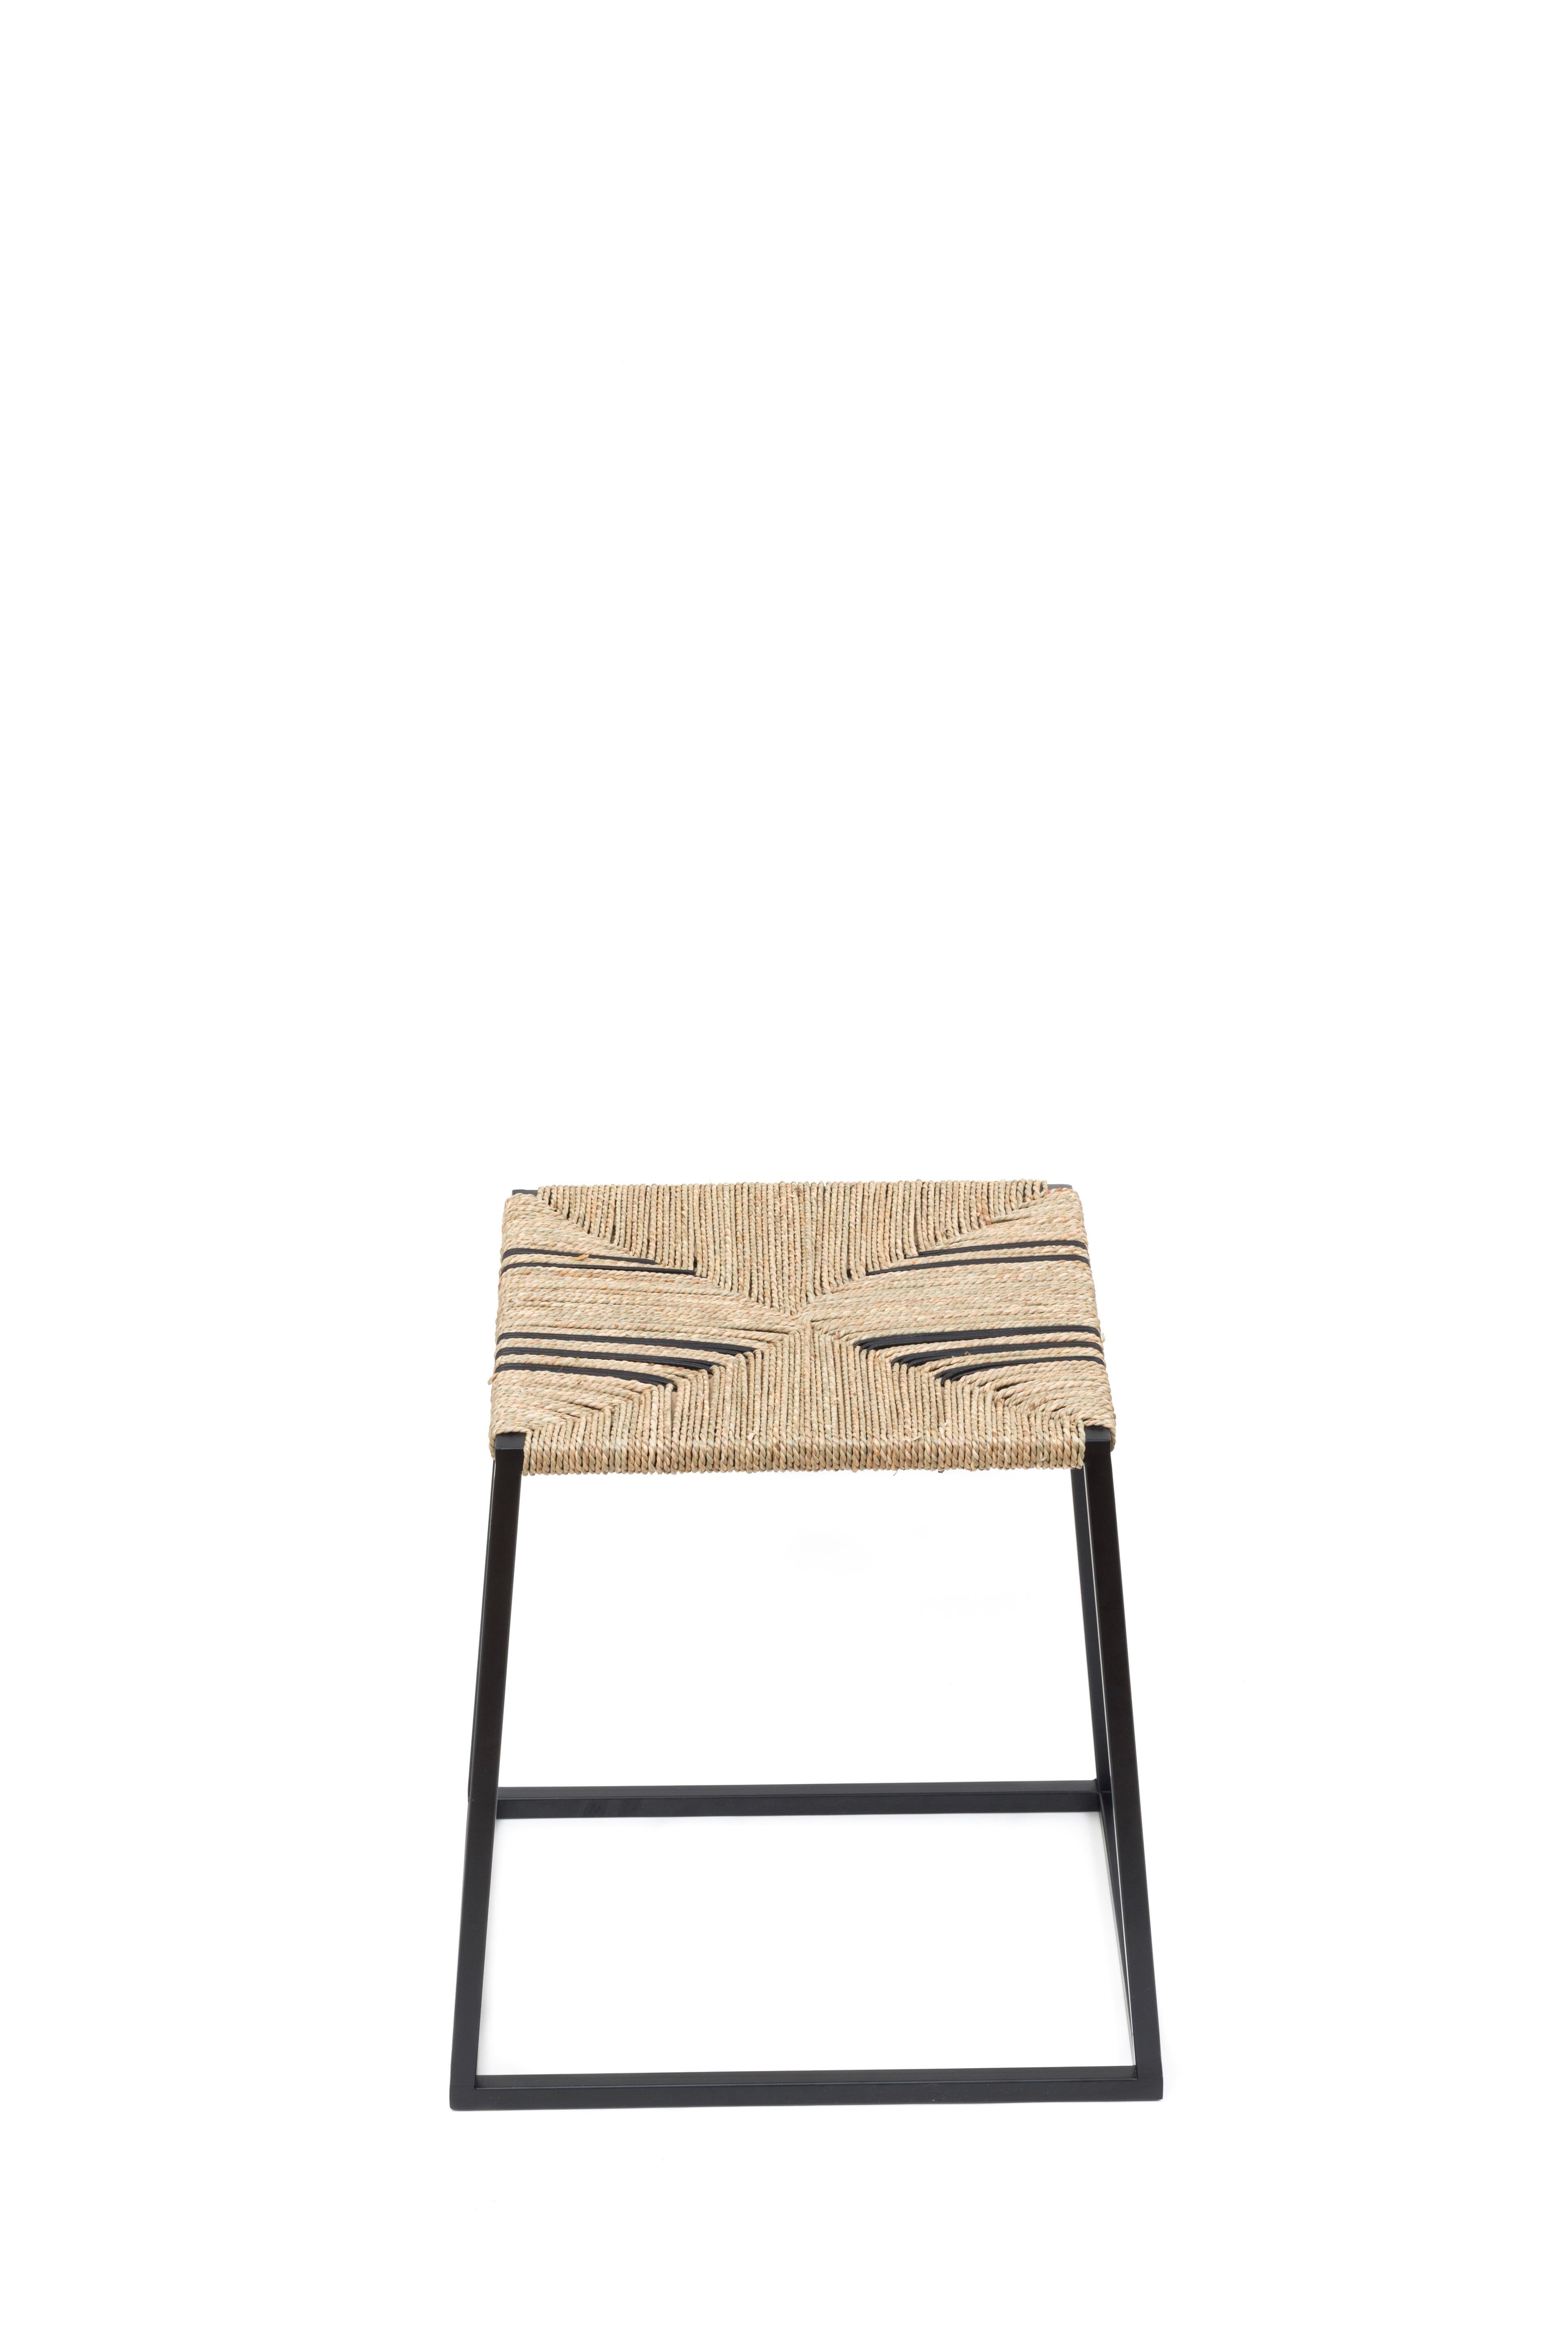 Alp Stool B 105 by Alp Design
Designer: Annick L Petersen.
Dimensions: W 35, D 43, H 45 cm.
Materials: metal base with matt black powder coat finish, seagrass and black leather cord seat using the traditional rush weaving technique.

The alp stool